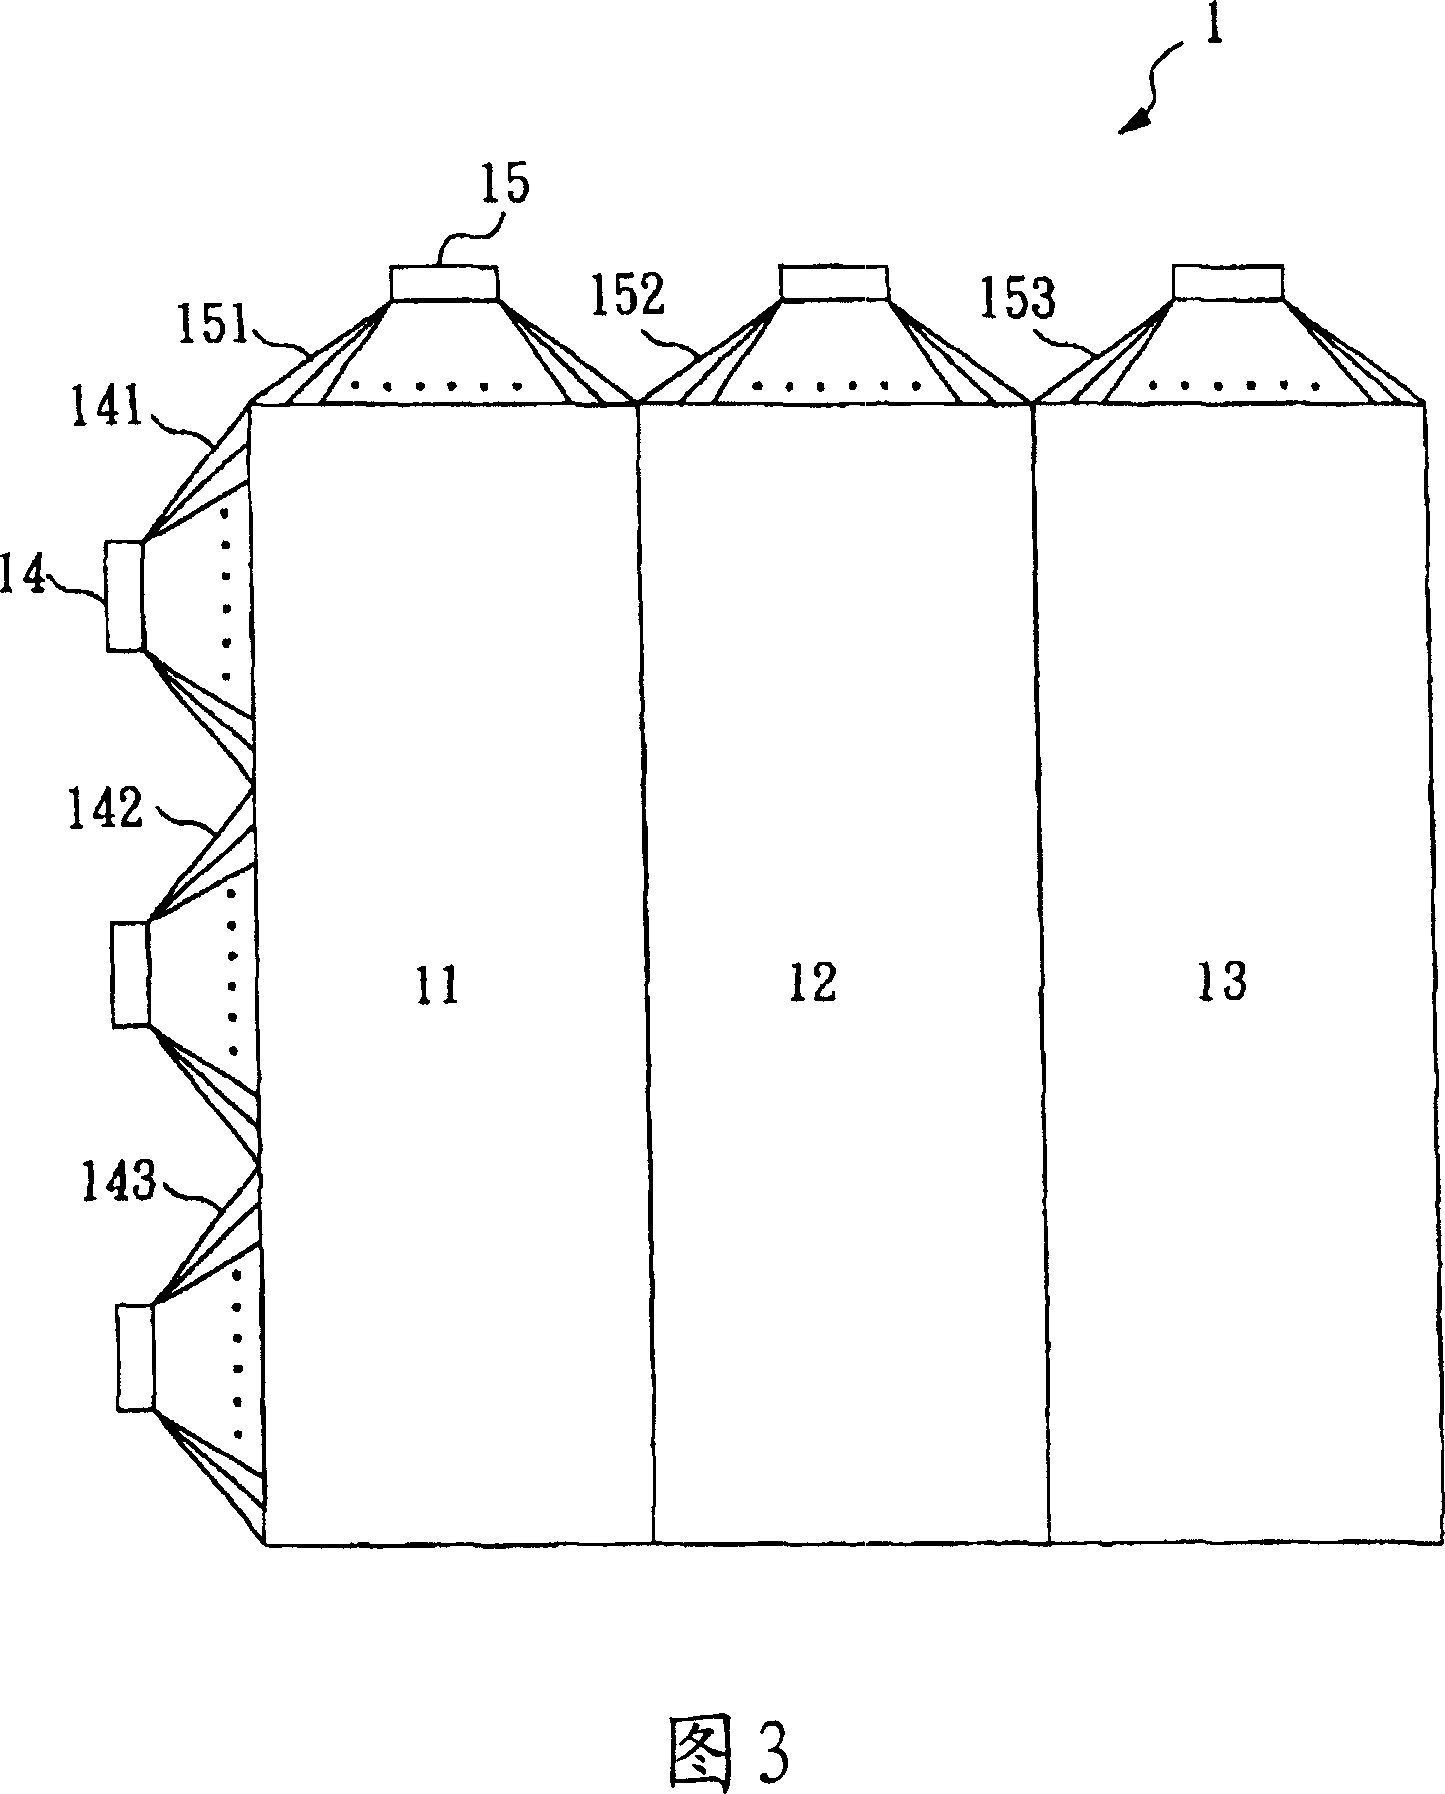 Liquid crystal display faceplate, and base plate of array in active mode